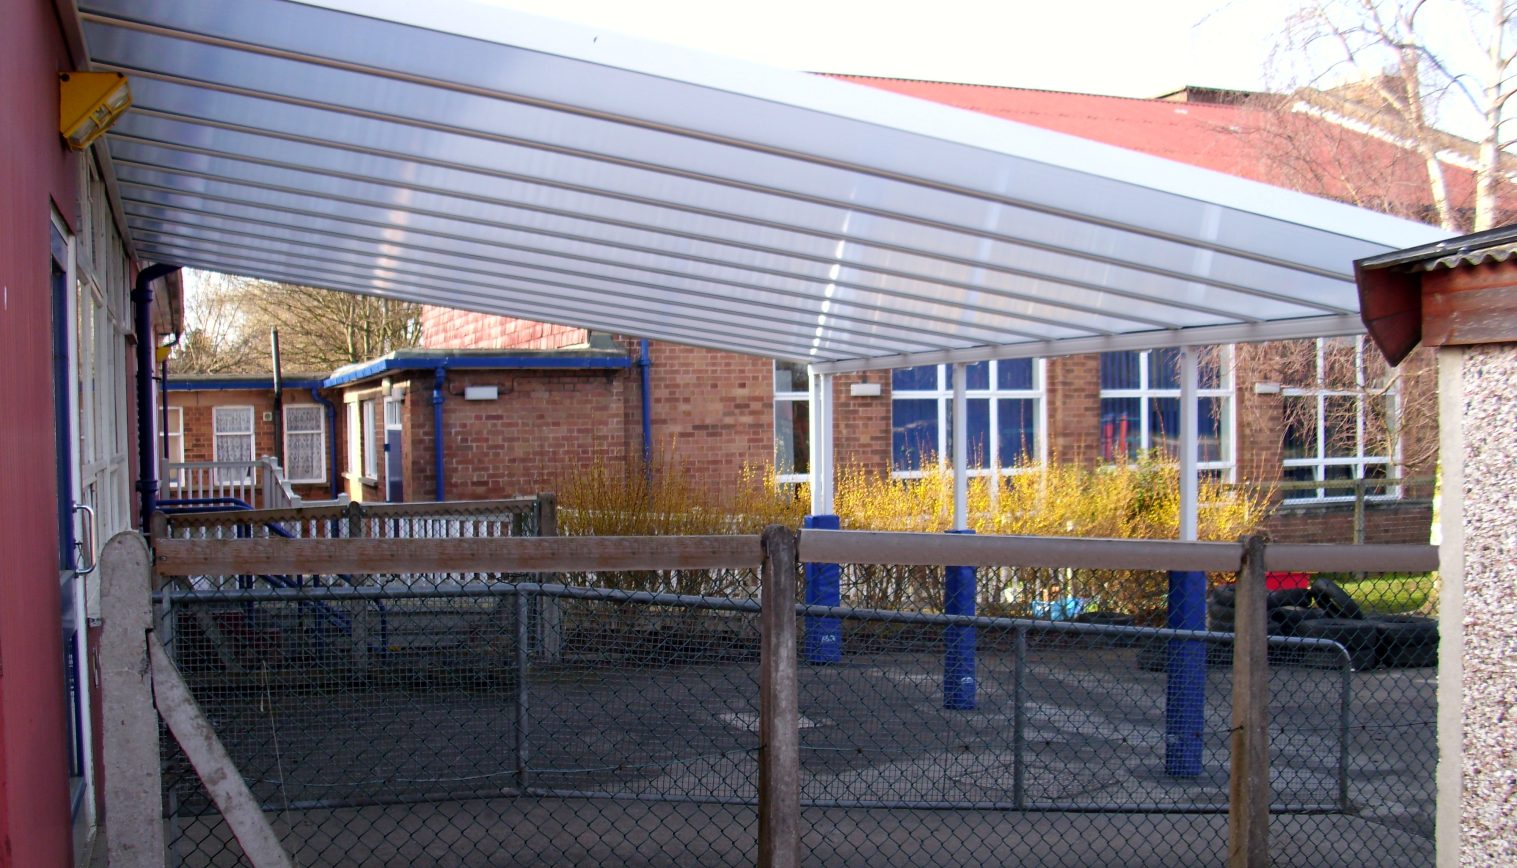 Thorn Grove Primary School – Wall Mounted Canopy – Second Installation